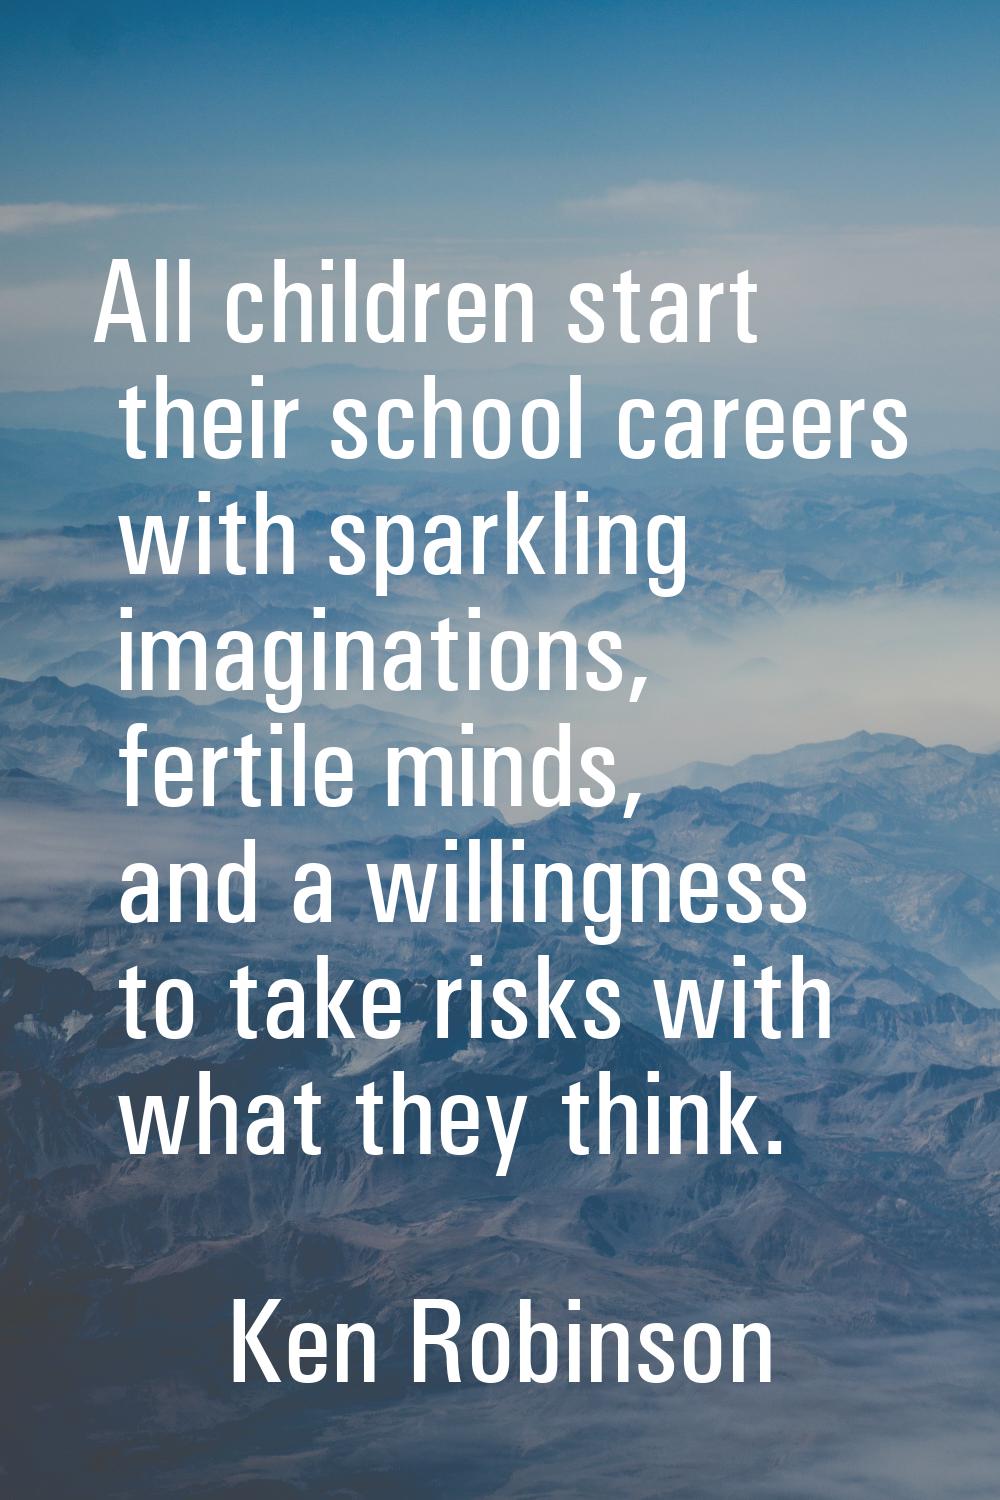 All children start their school careers with sparkling imaginations, fertile minds, and a willingne